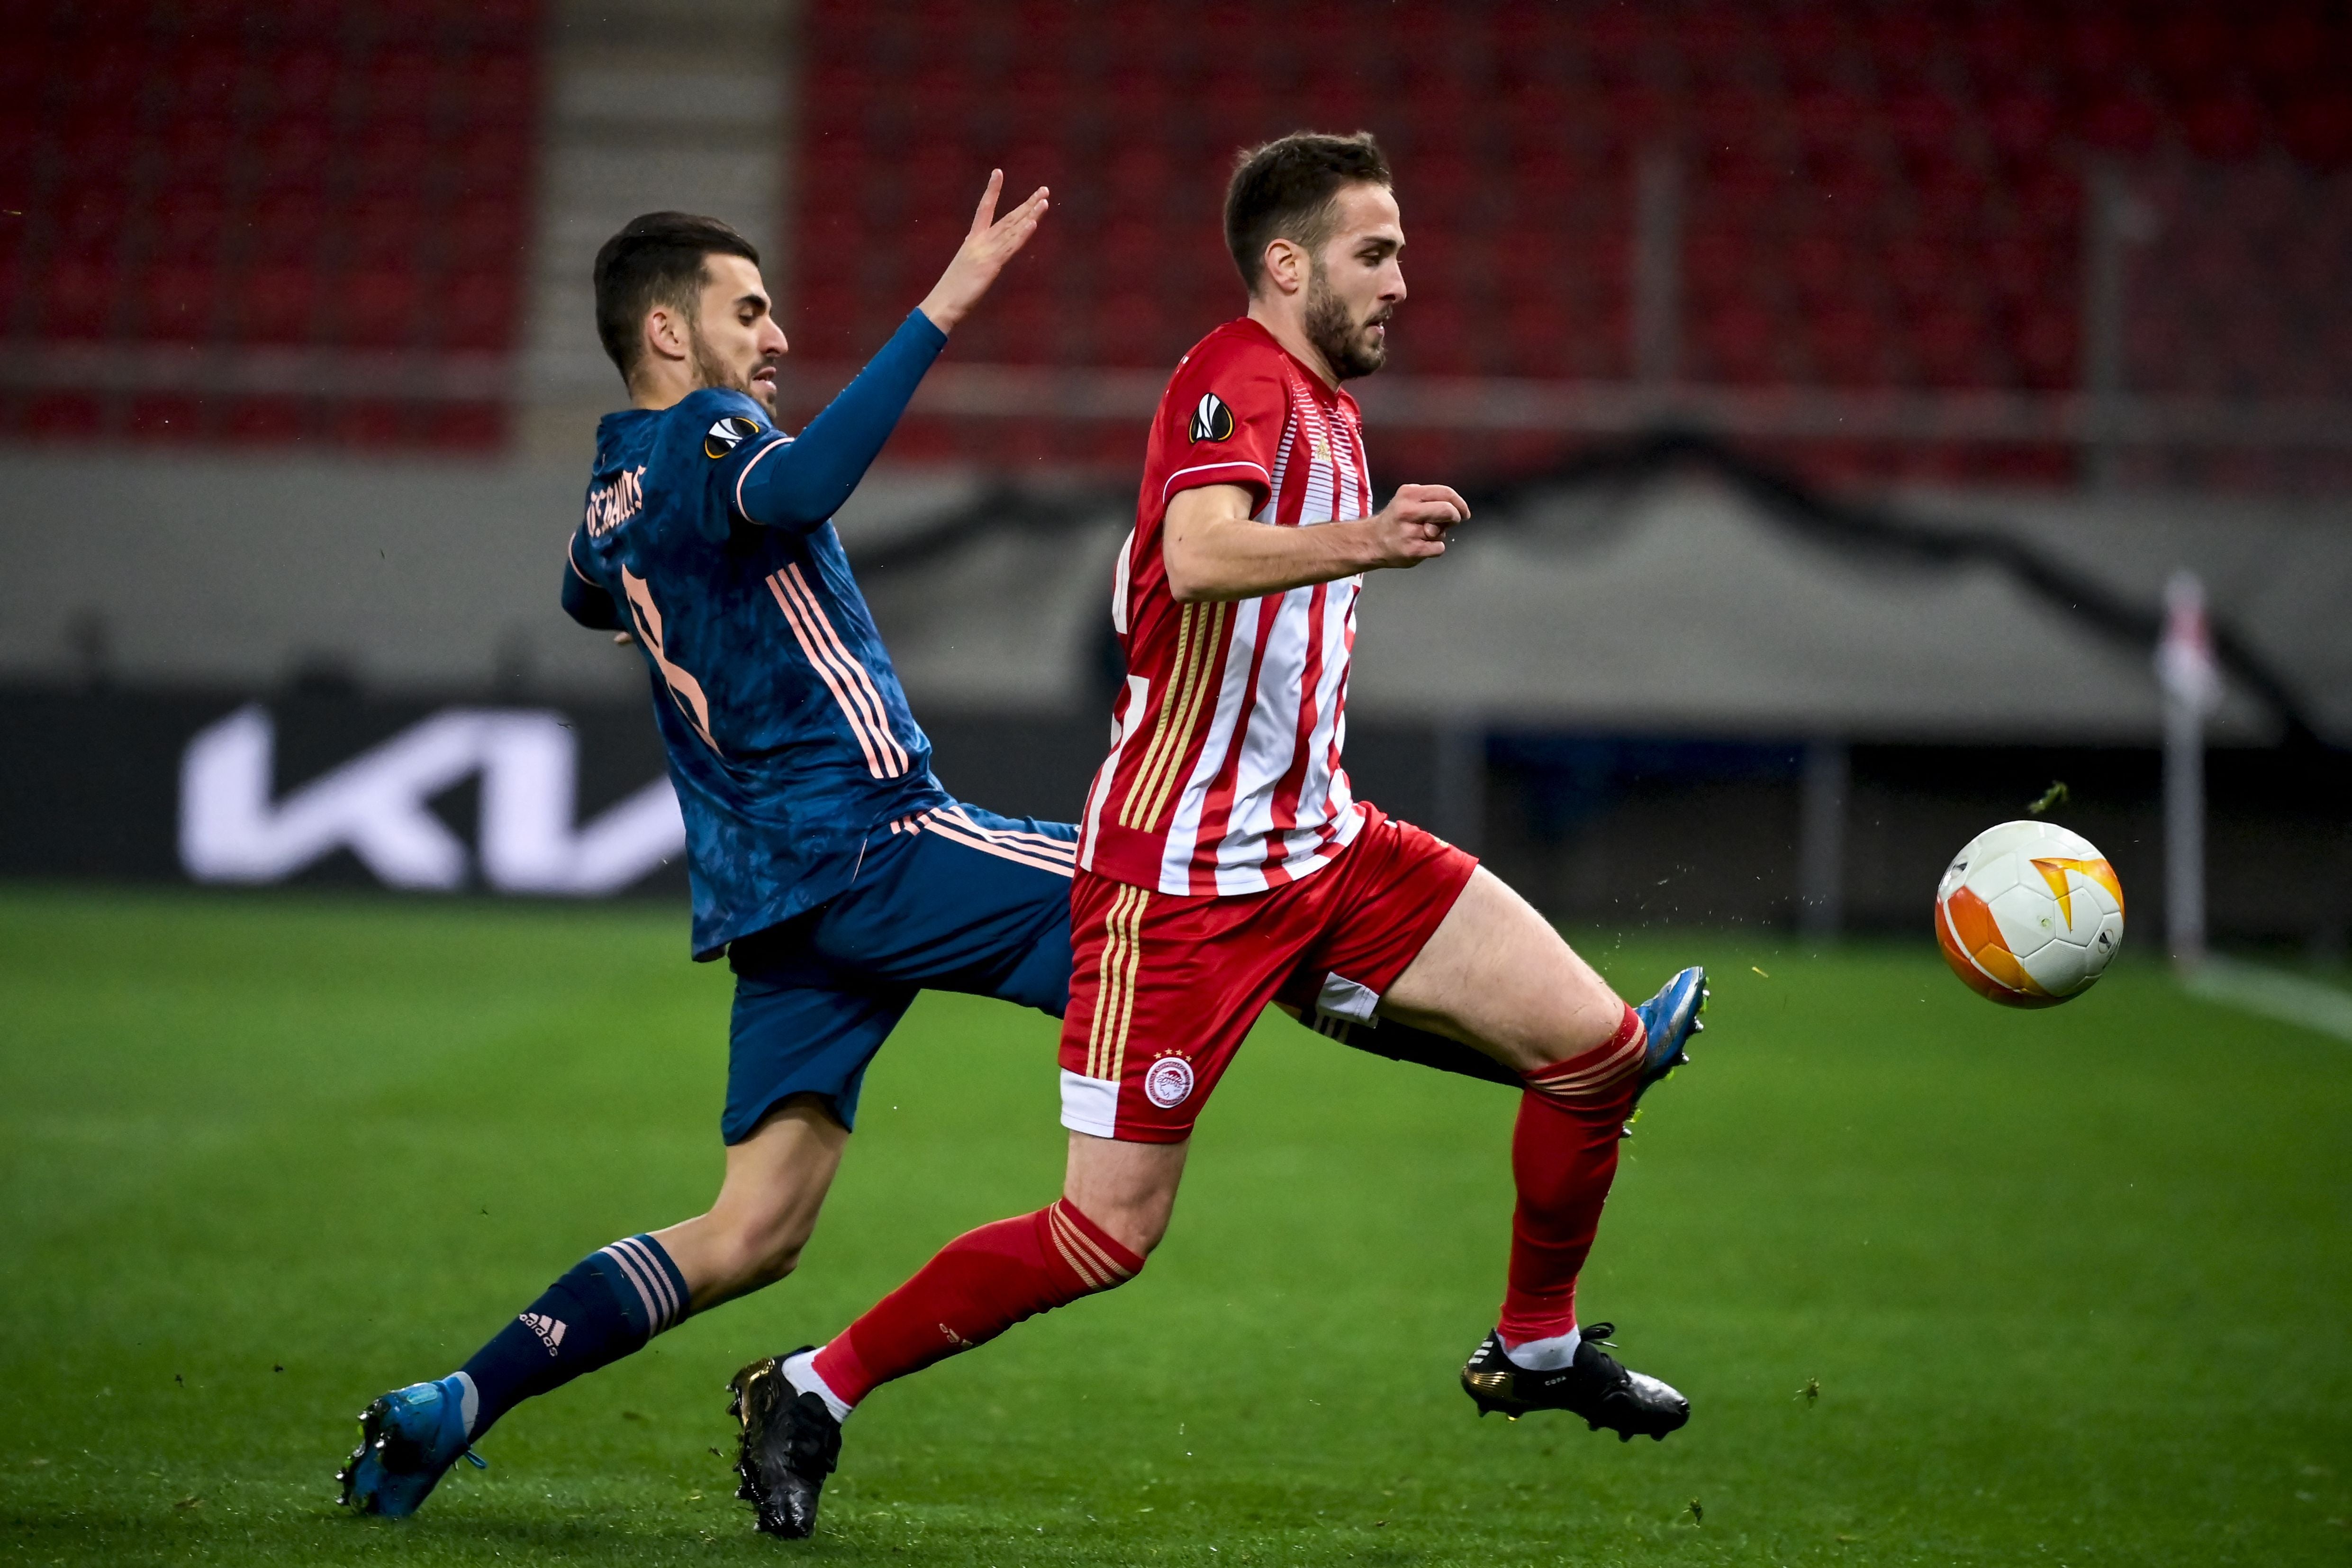 Dani Ceballos (left) was involved in Olympiacos’ goal but played well thereafter